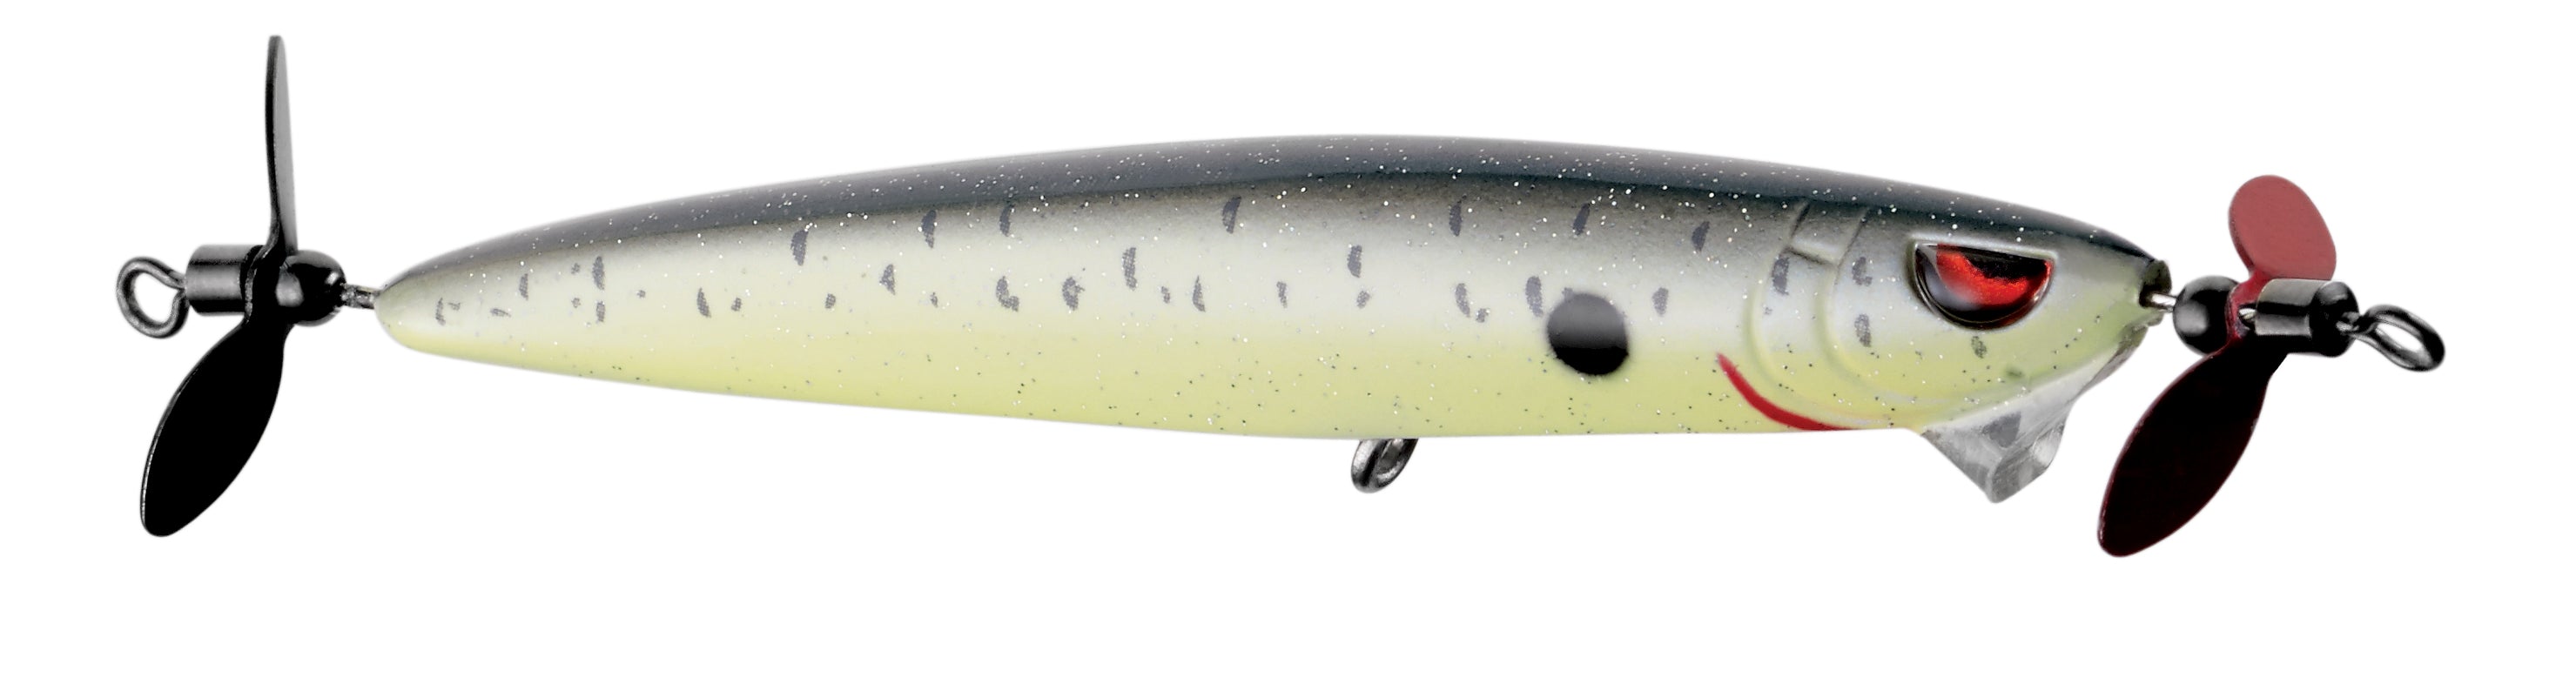 Authentic Handmade Goby Sea Shad Bait Form 3 Soft Plastic Lure